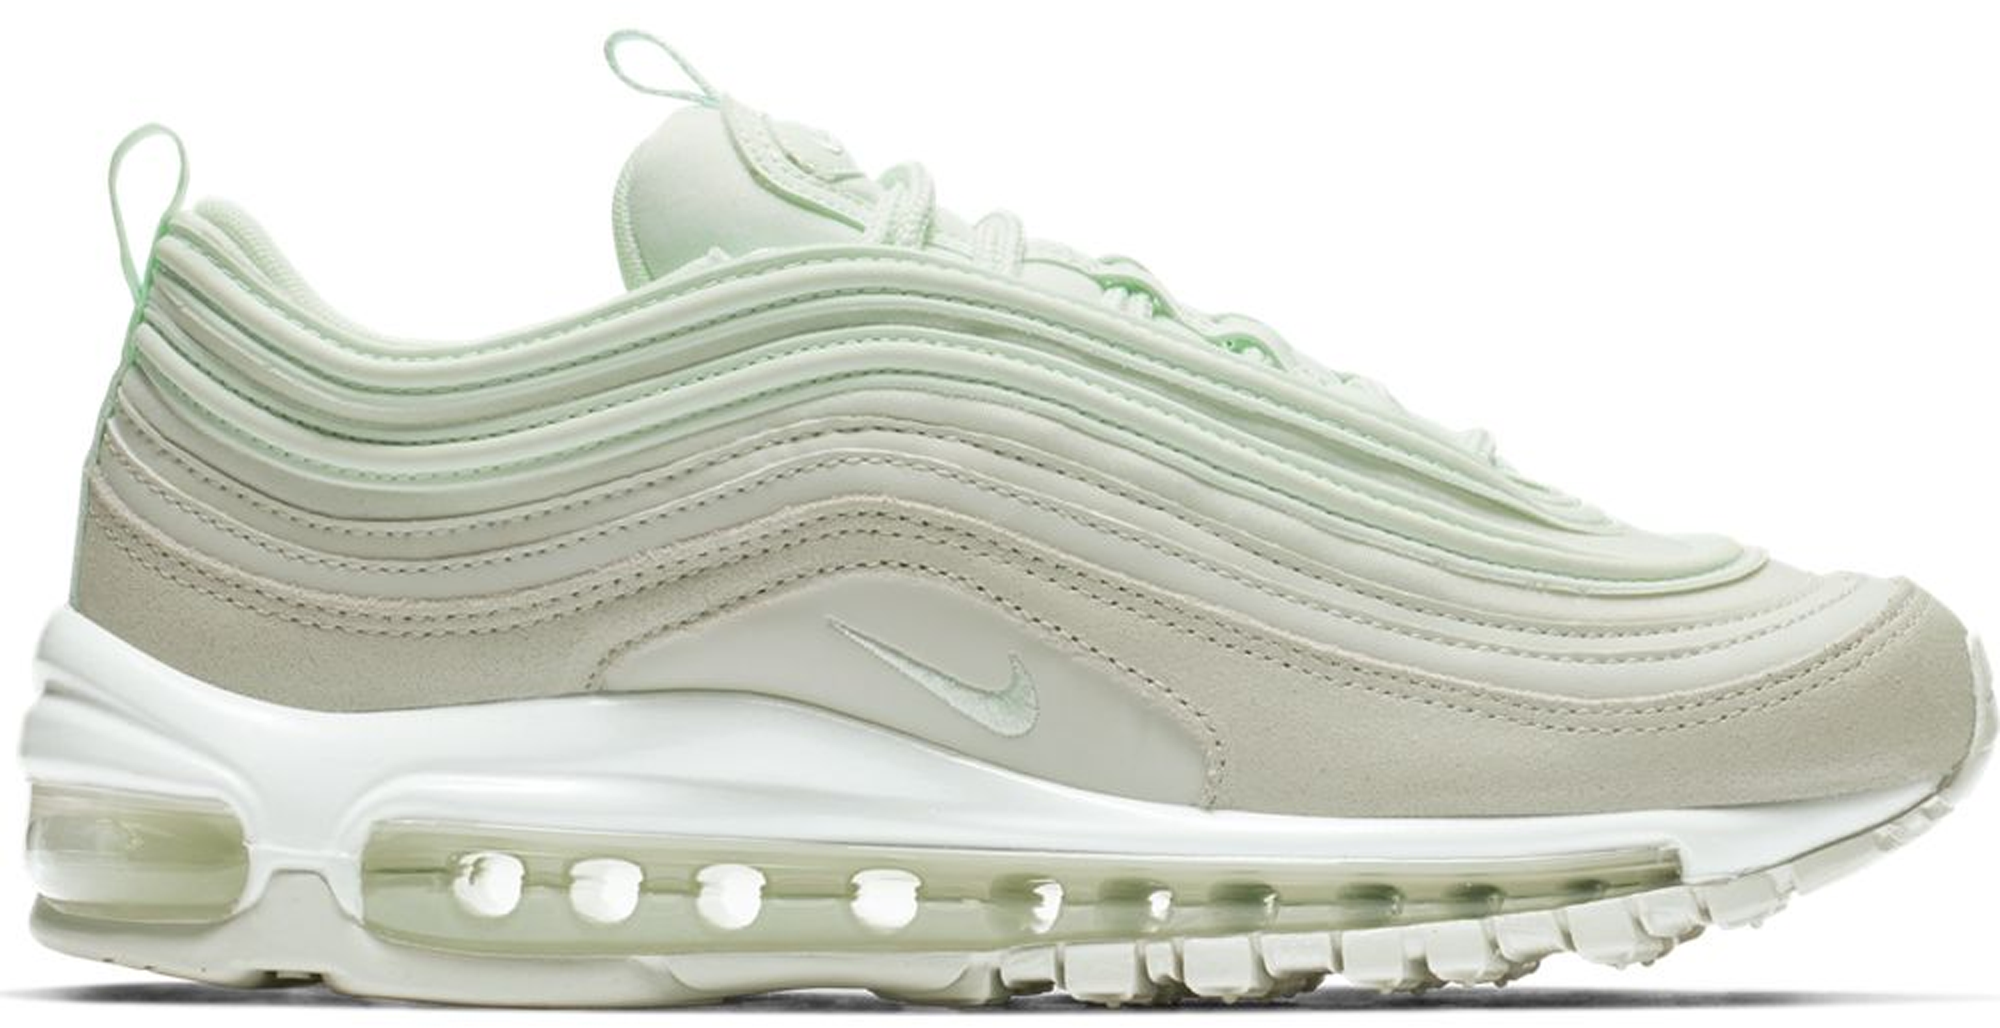 Nike Air Max 97 Barely Green (W 